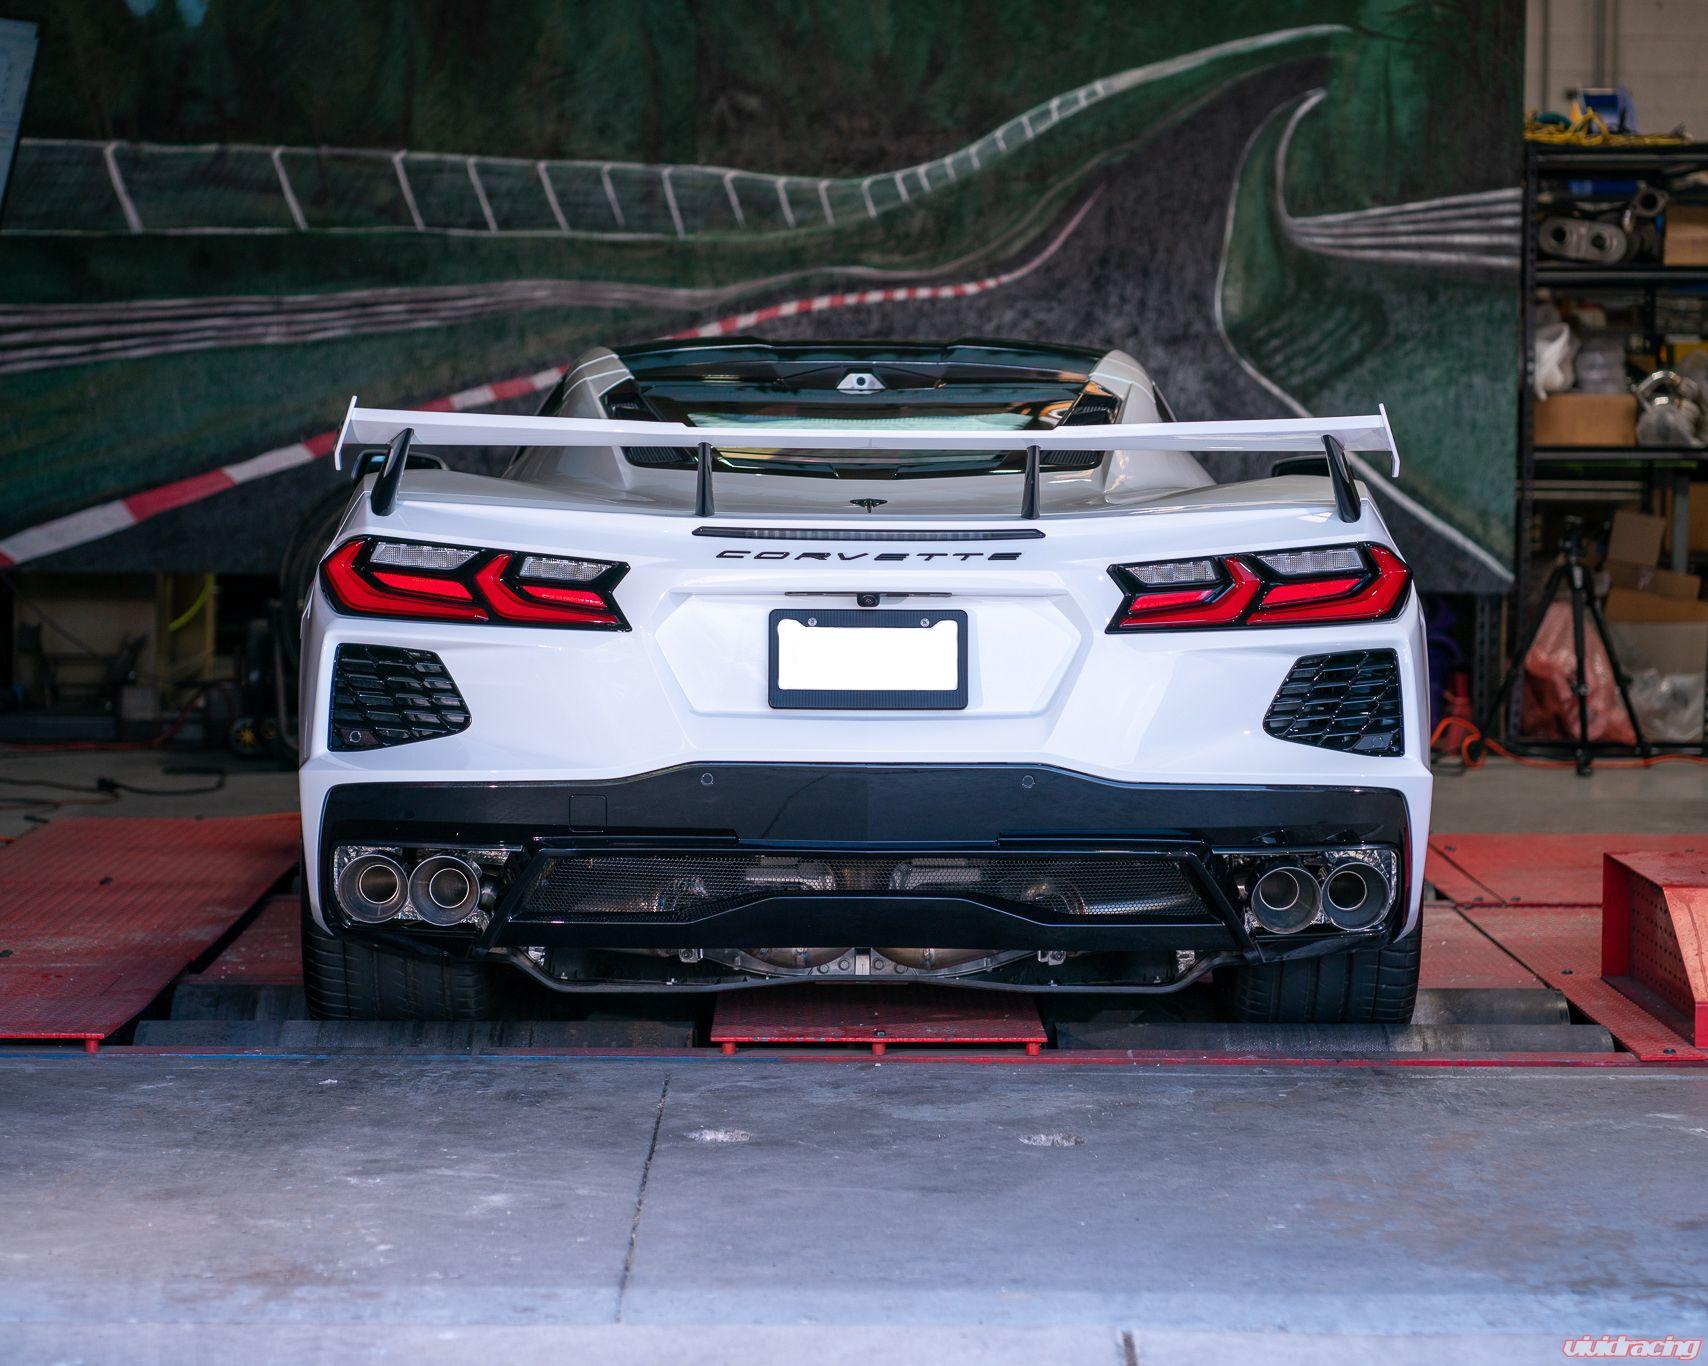 Performance Exhausts: Sound And Power